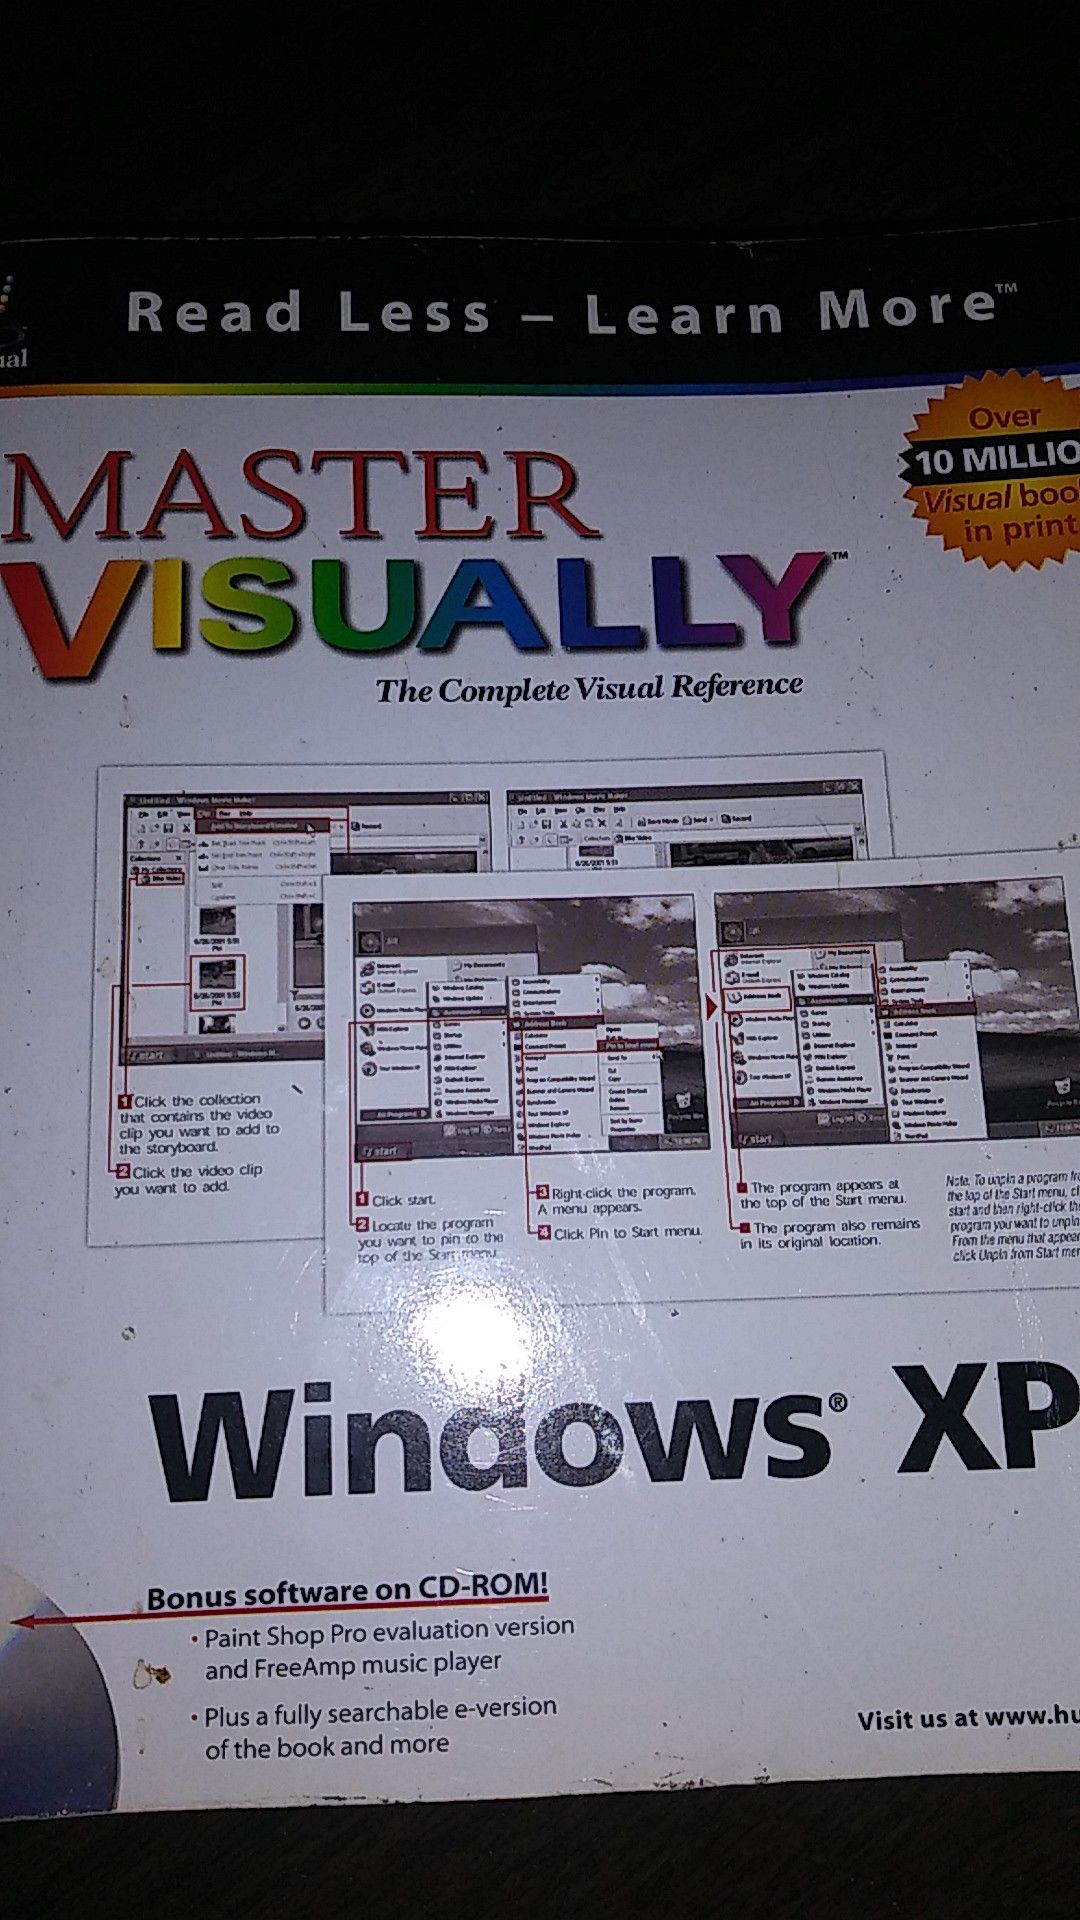 Master visually the complete visual reference Windows XP